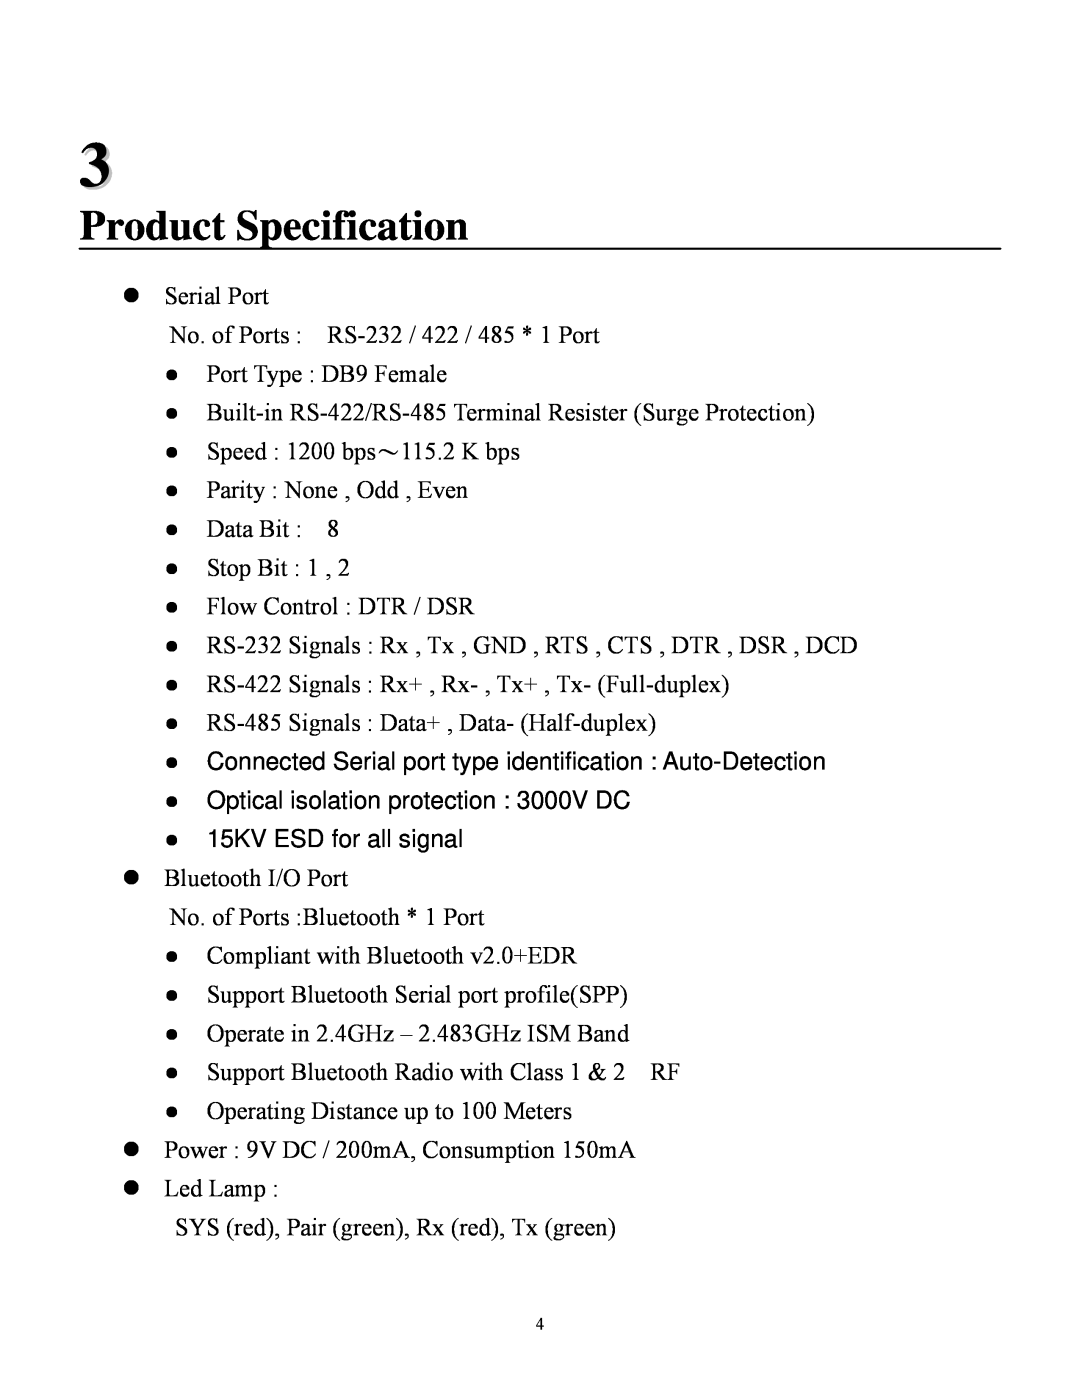 Quatech SS-BLT-400 operation manual Product Specification, Connected Serial port type identification Auto-Detection 